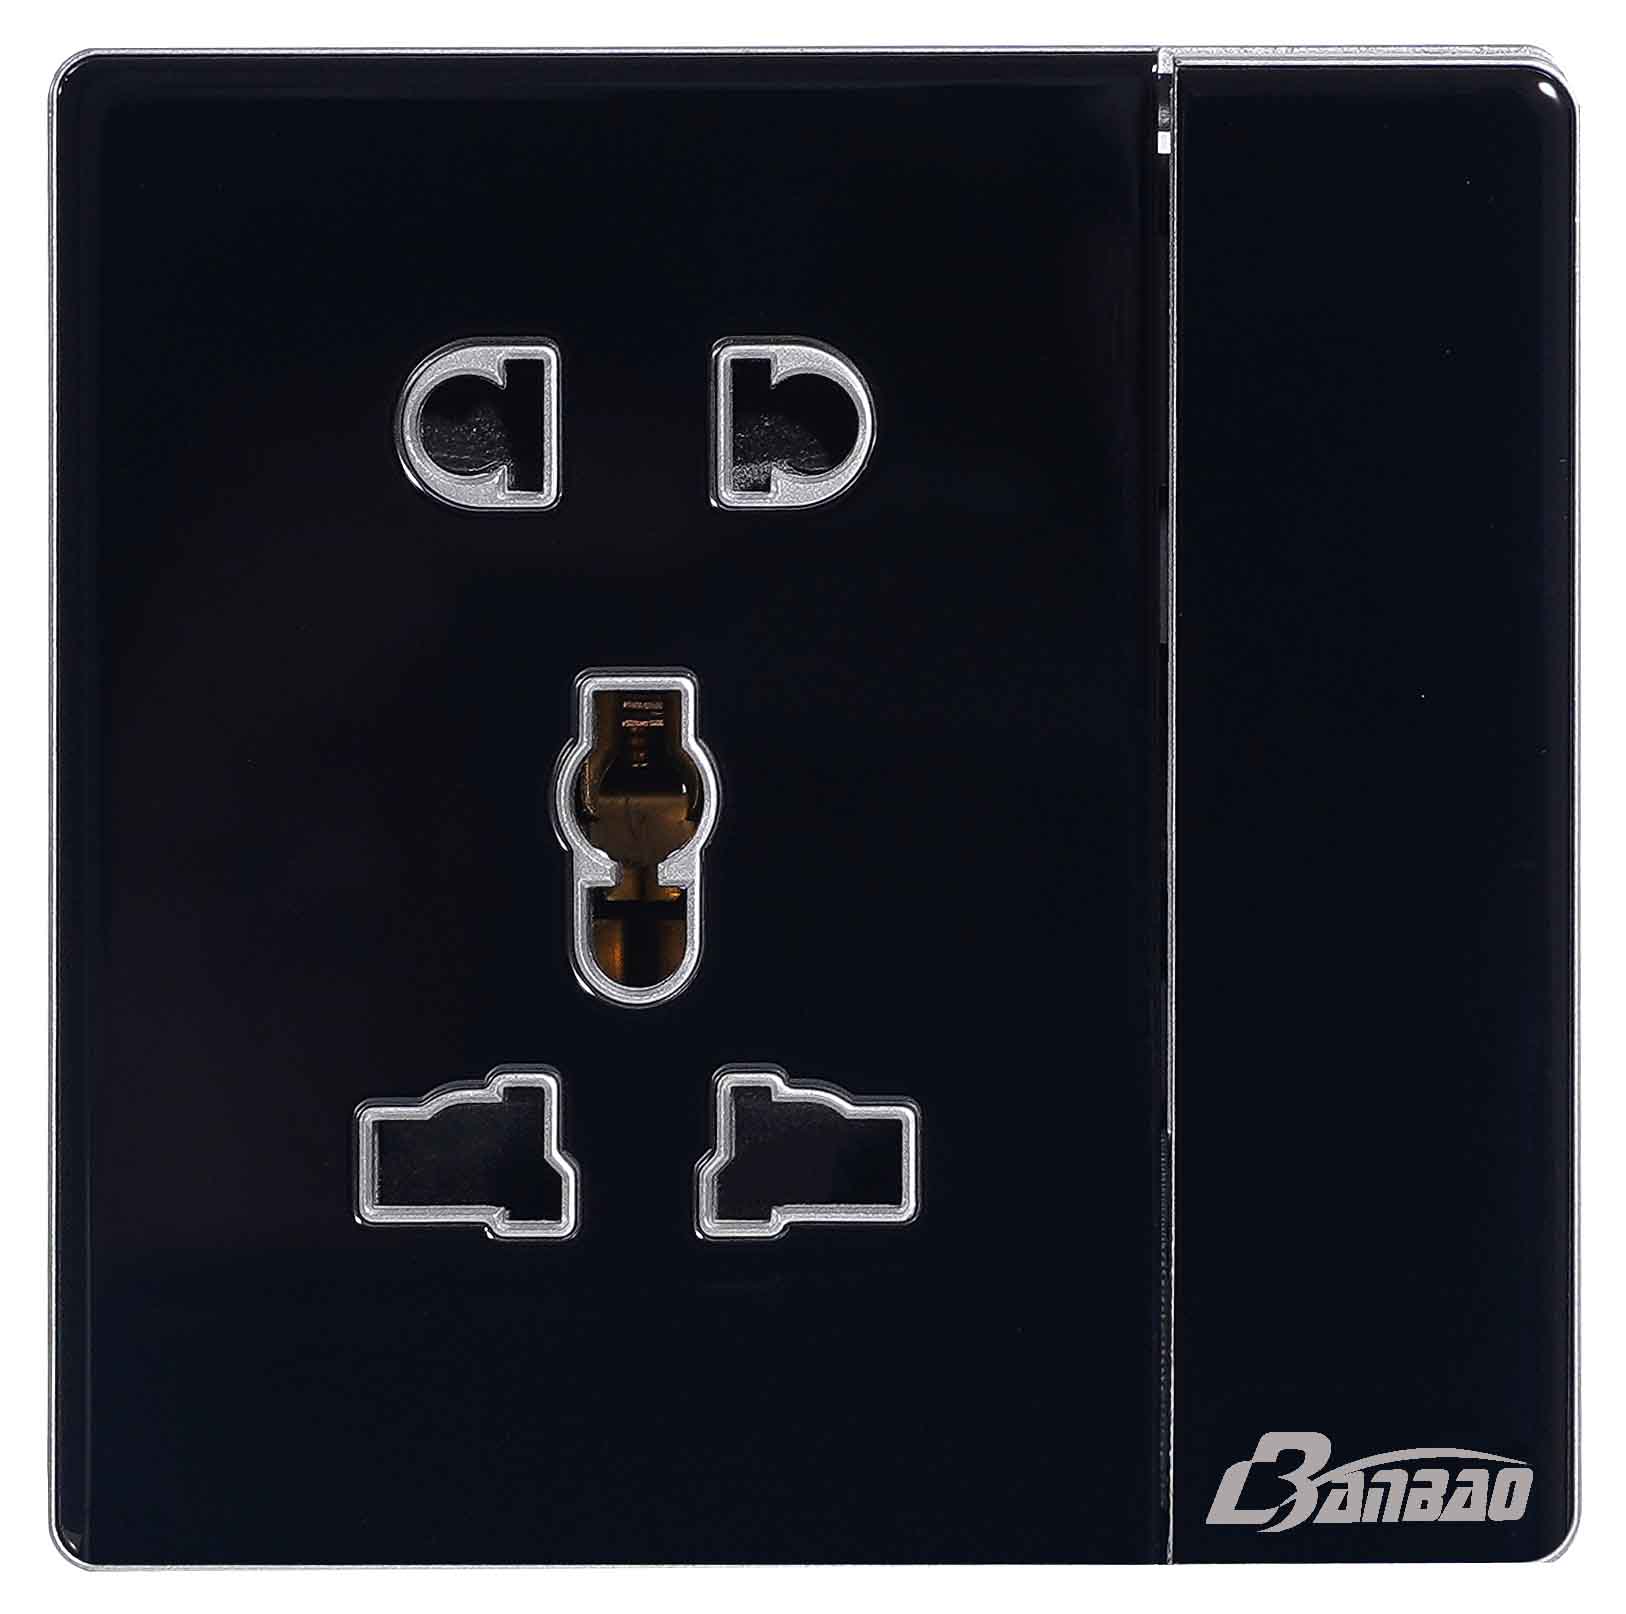 4gang 1way 10/16A Wall Switch Black color Glass panel Big Button